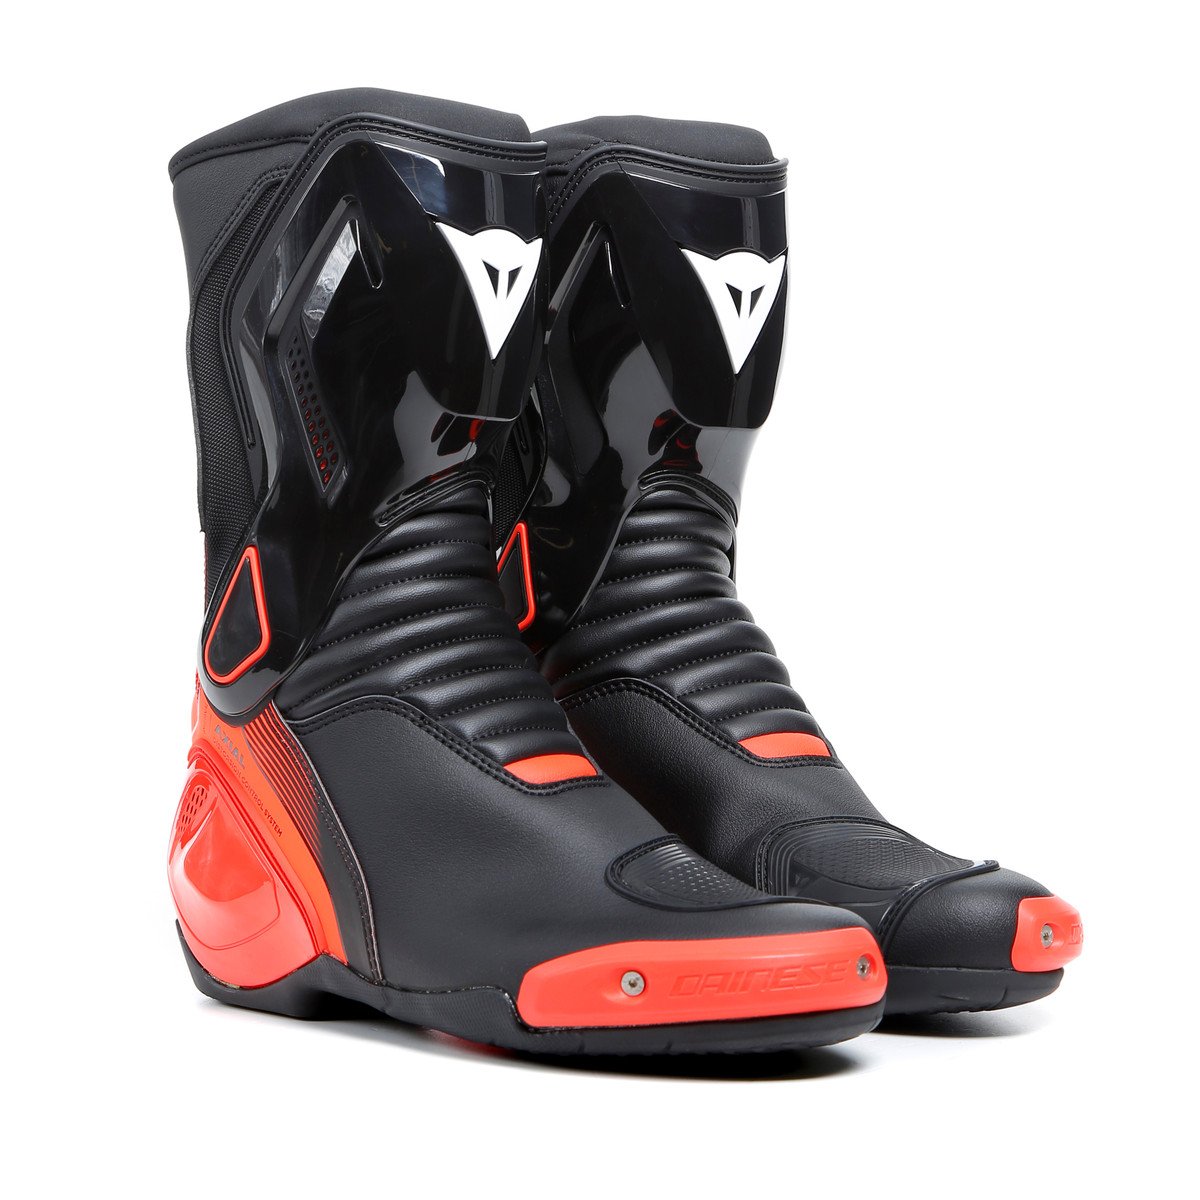 Image of Dainese Nexus 2 Boots Black Fluo Red Size 45 EN